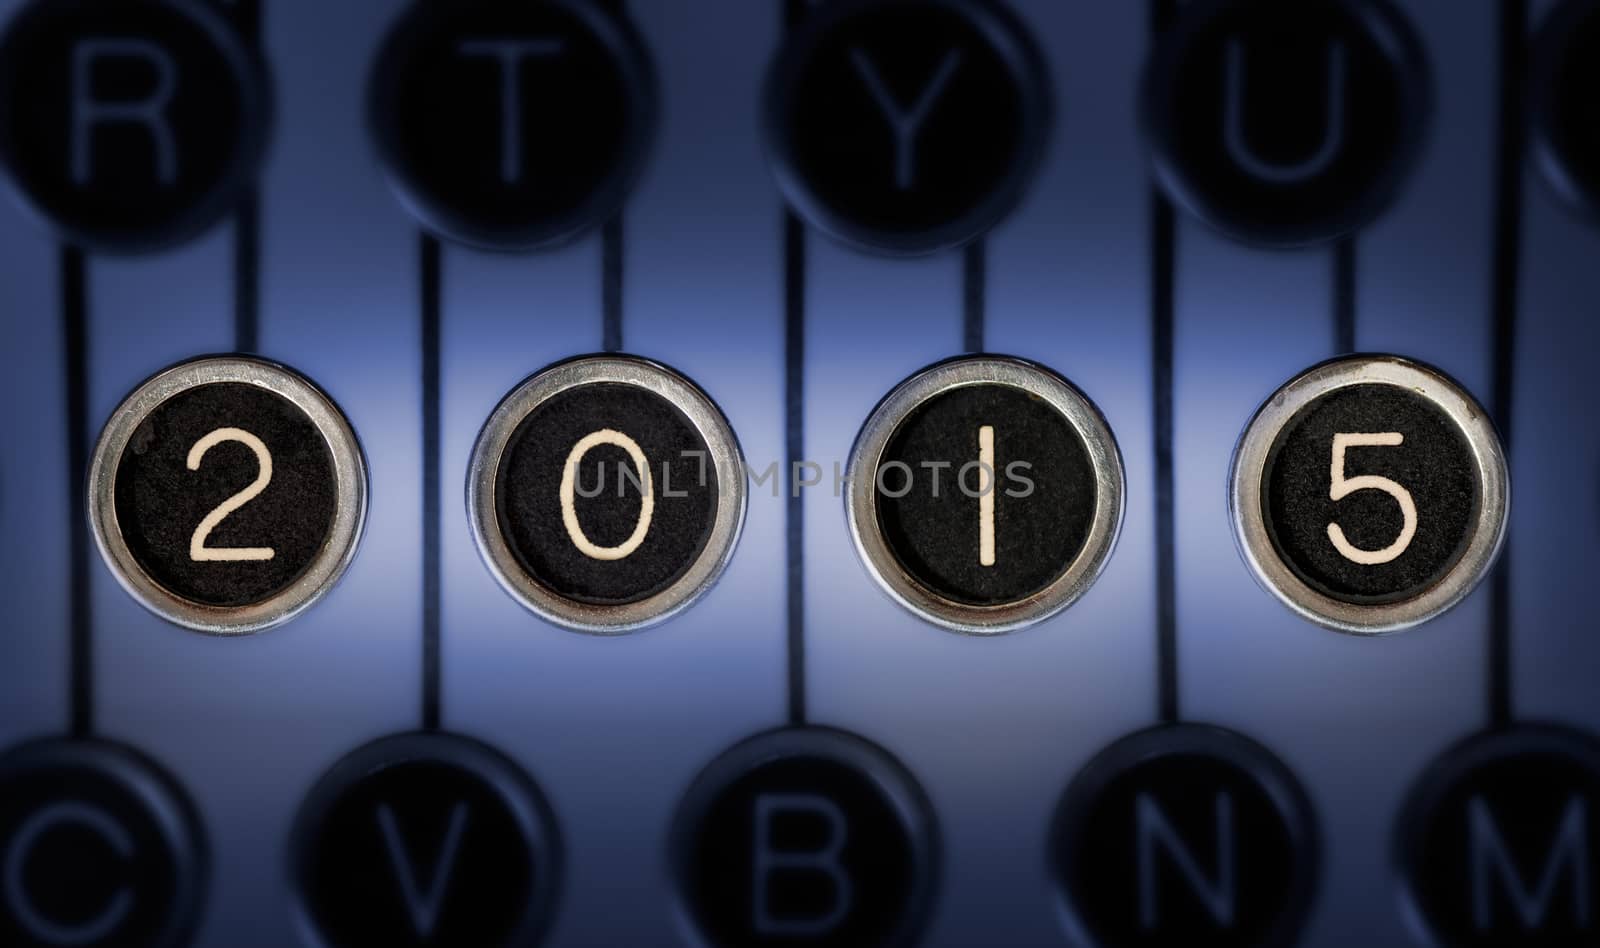 Image of old typewriter keyboard with scratched chrome keys that form "2015". Lighting and focus are centered on "2015". 